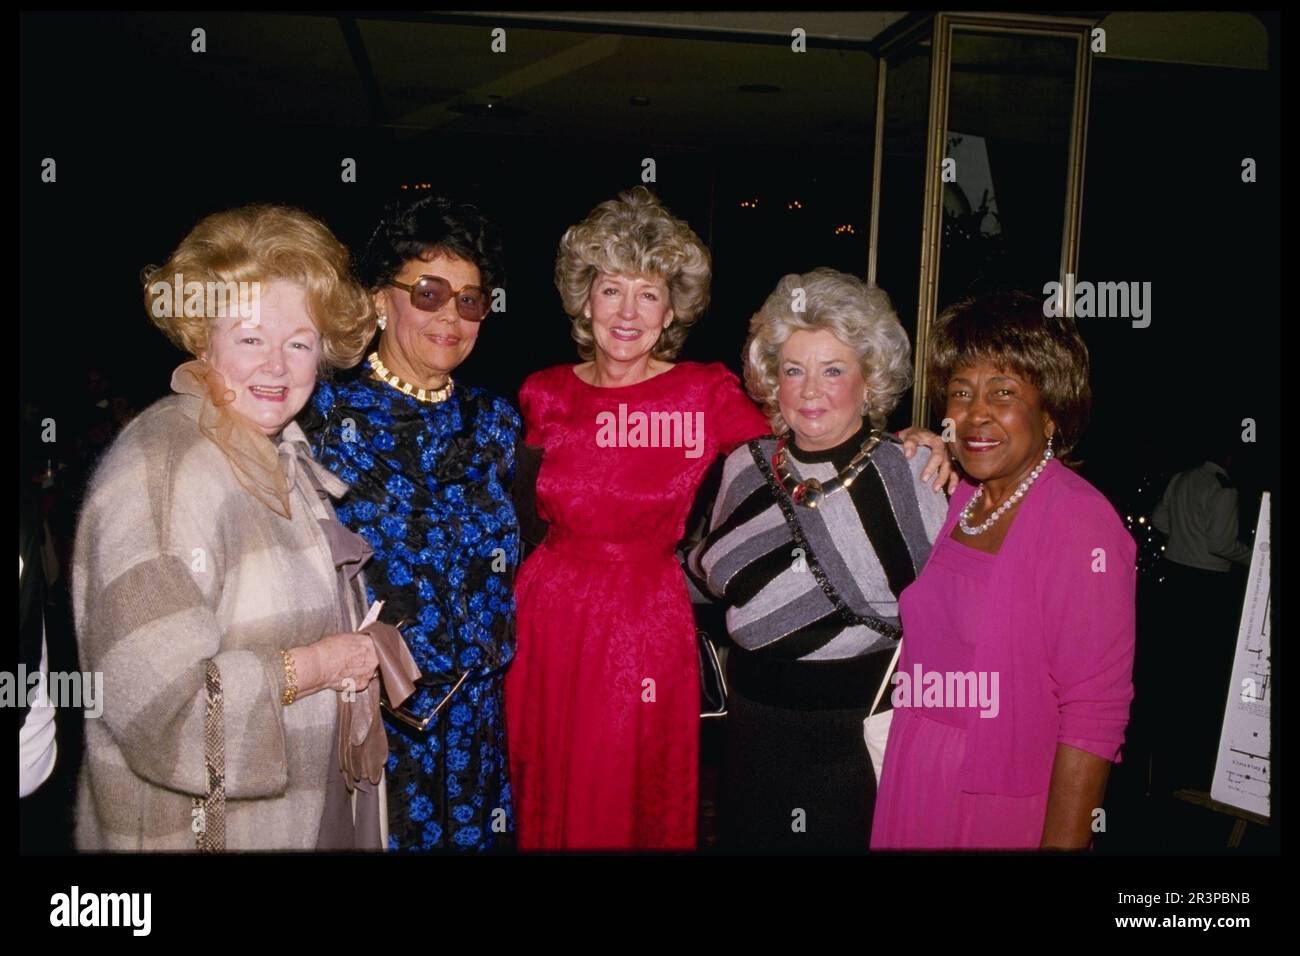 Hollywood, CA, USA; ZELMA BULLOCK(Tina Turner's mother), PHYLLIS QUINN, GEORGIA HOLT(Cher's mother), MABEL JOHNSON (Diahann Carroll's mother) and DOROTHY RITTER (John Ritter's mother) are shown in this undated photo. (Michelson - Roger Karnbad/Date unknown) Mandatory Credit: Photo by Michelson/ZUMA Press. (©) Copyright 2006 Michelson EDITORIAL USAGE ONLY! Not for Commercial USAGE! Stock Photo